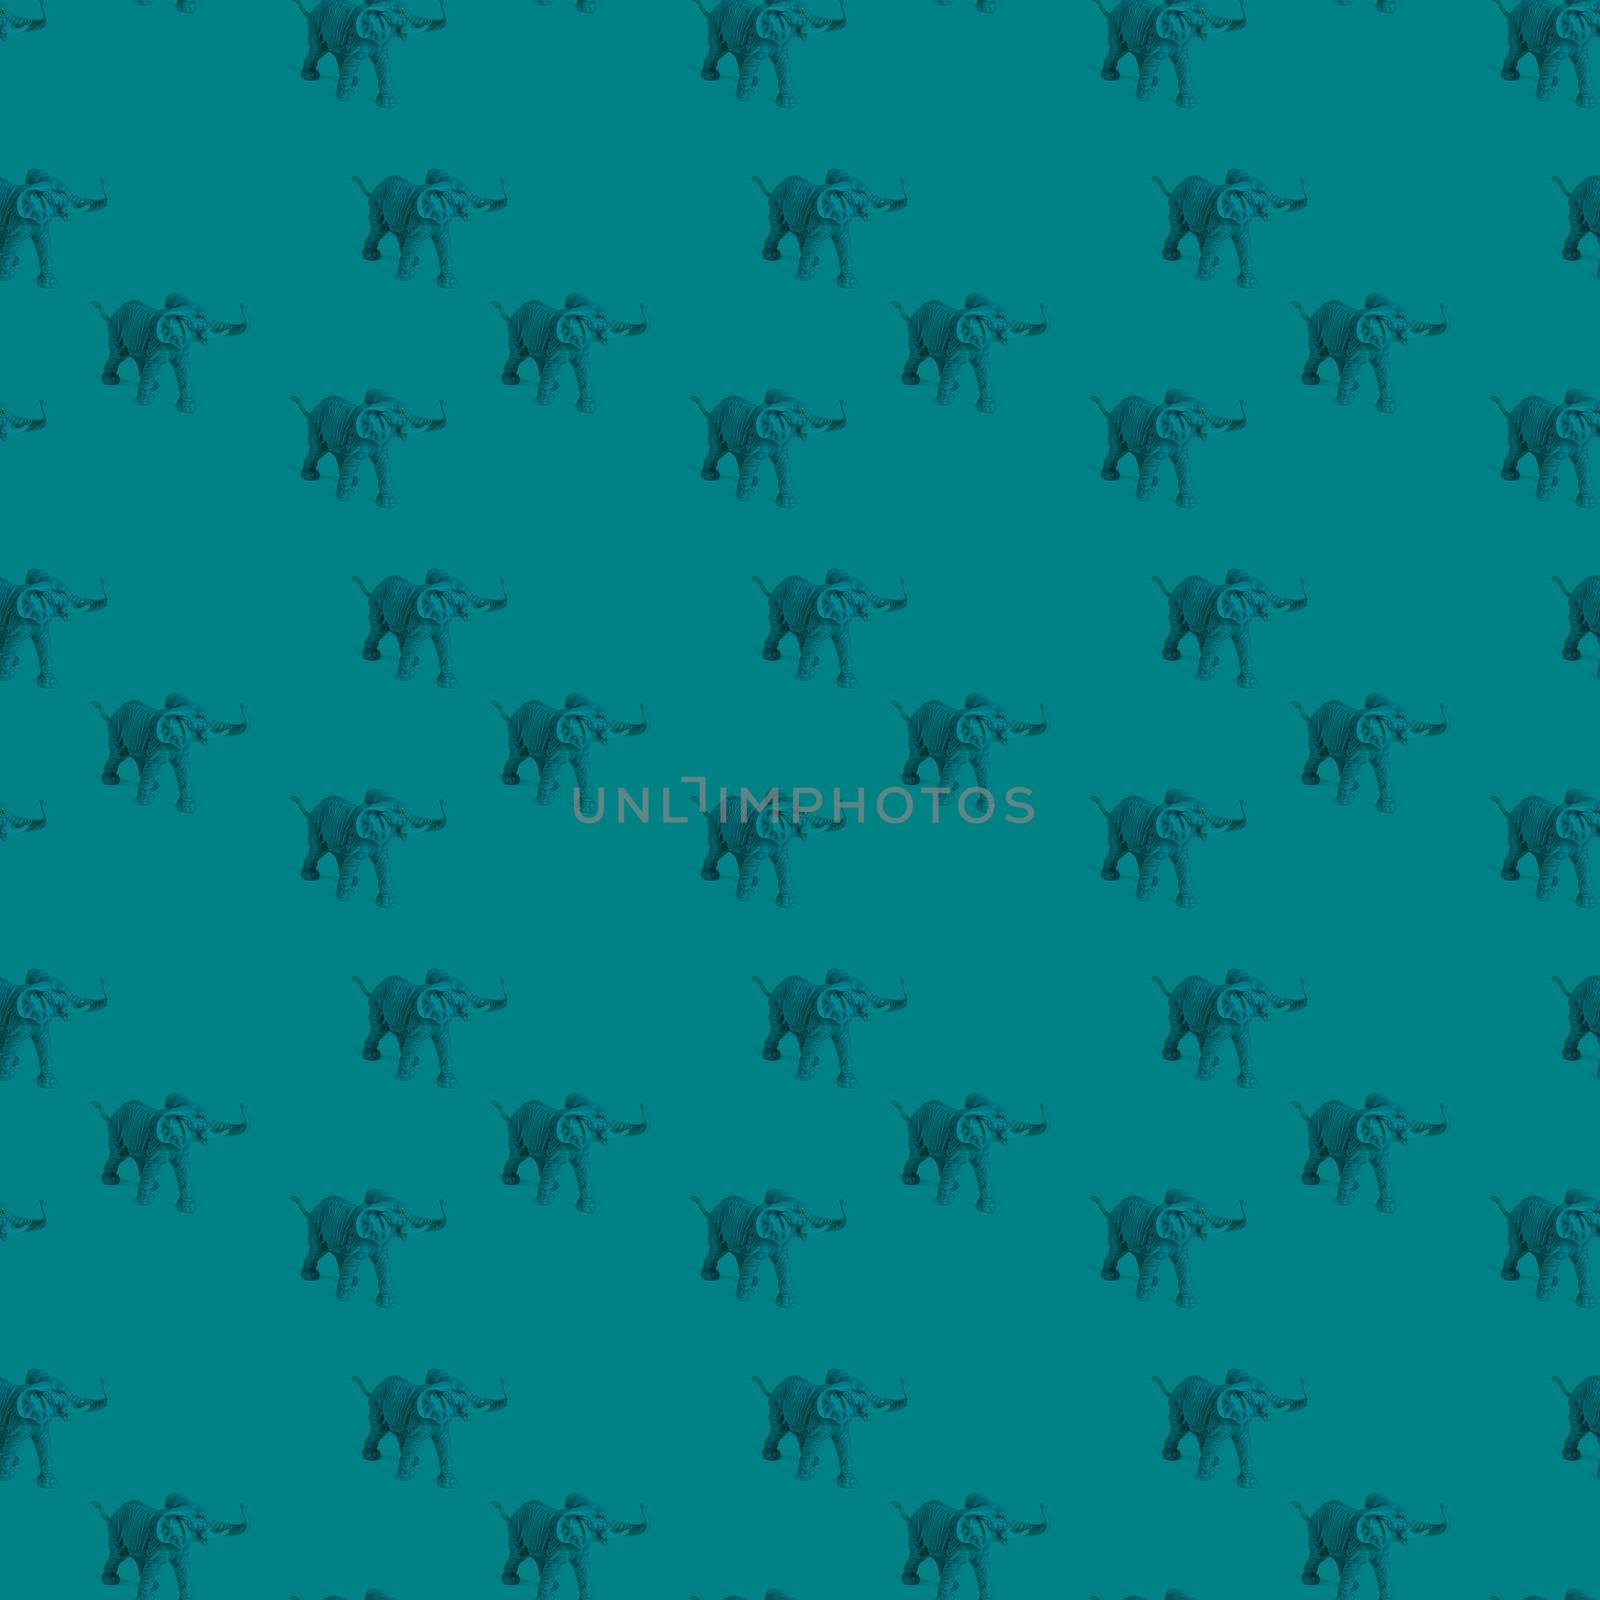 Seamless pattern with beautiful abstract elephants in a single color